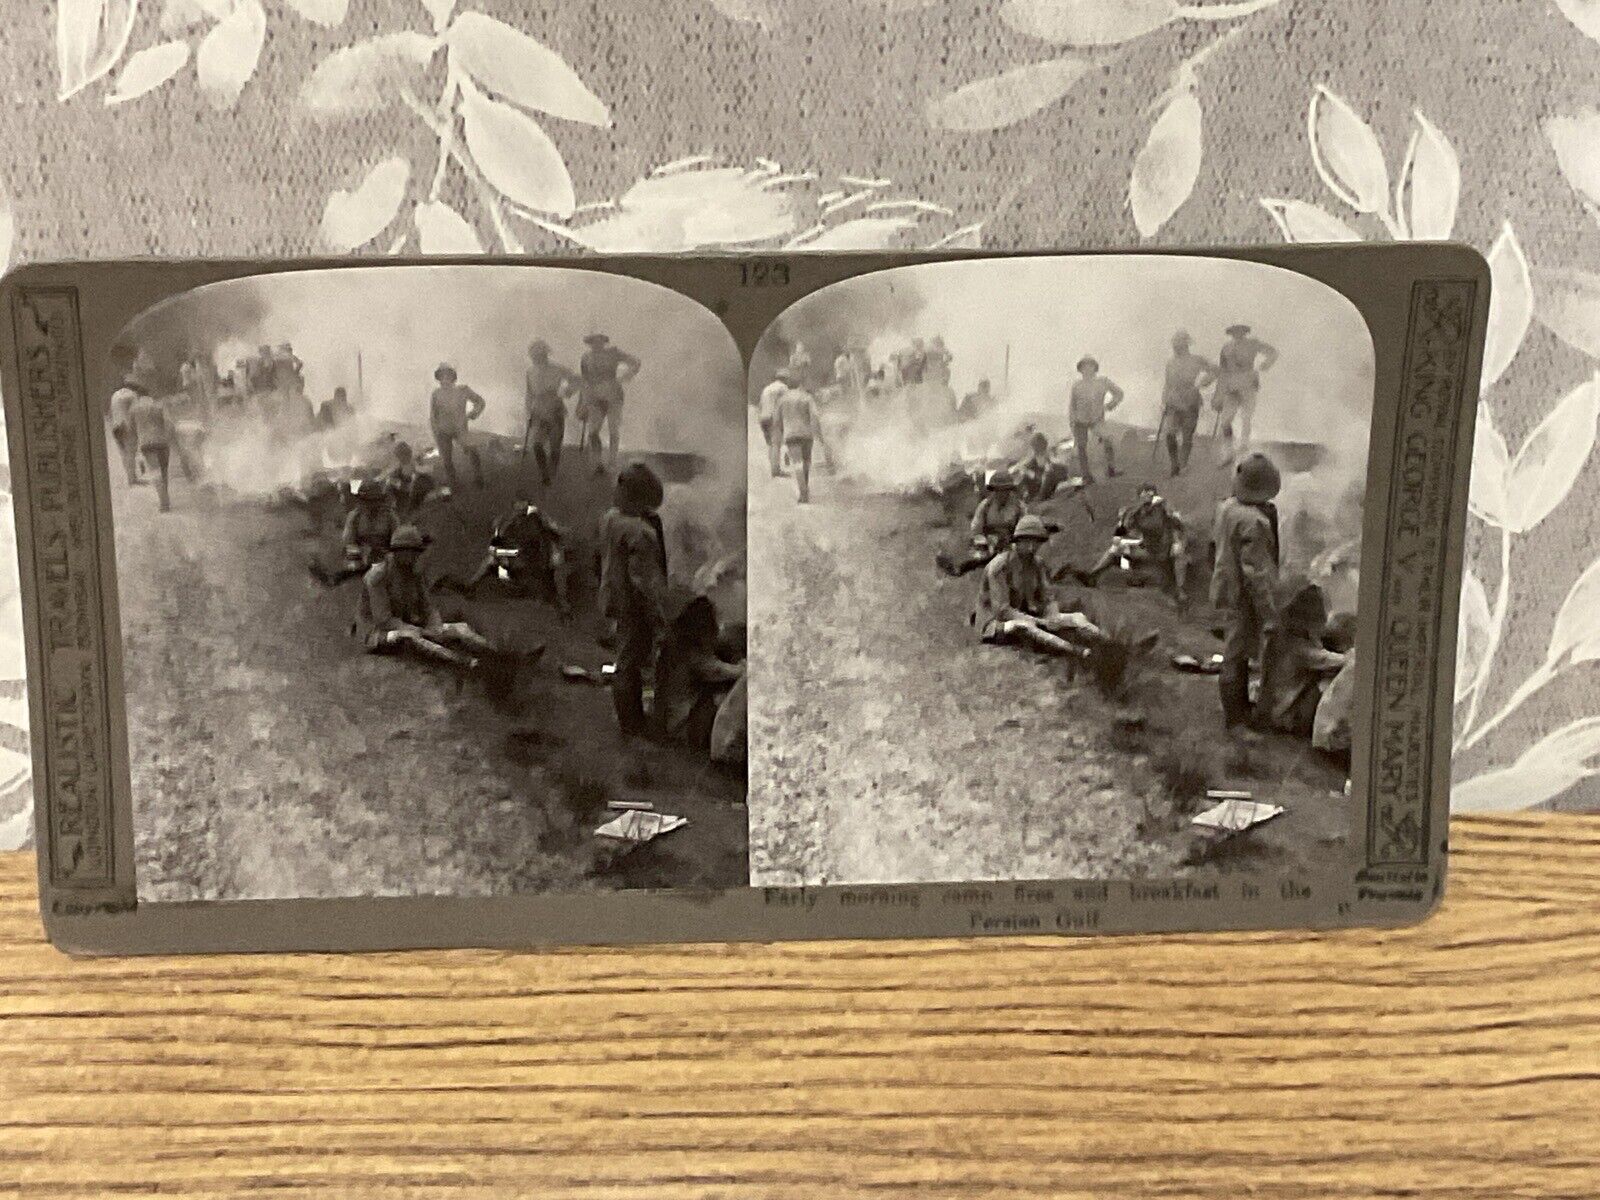 WW1 Stereo Viewing Vintage Stereoscope Photographs Historical Memorabilia 